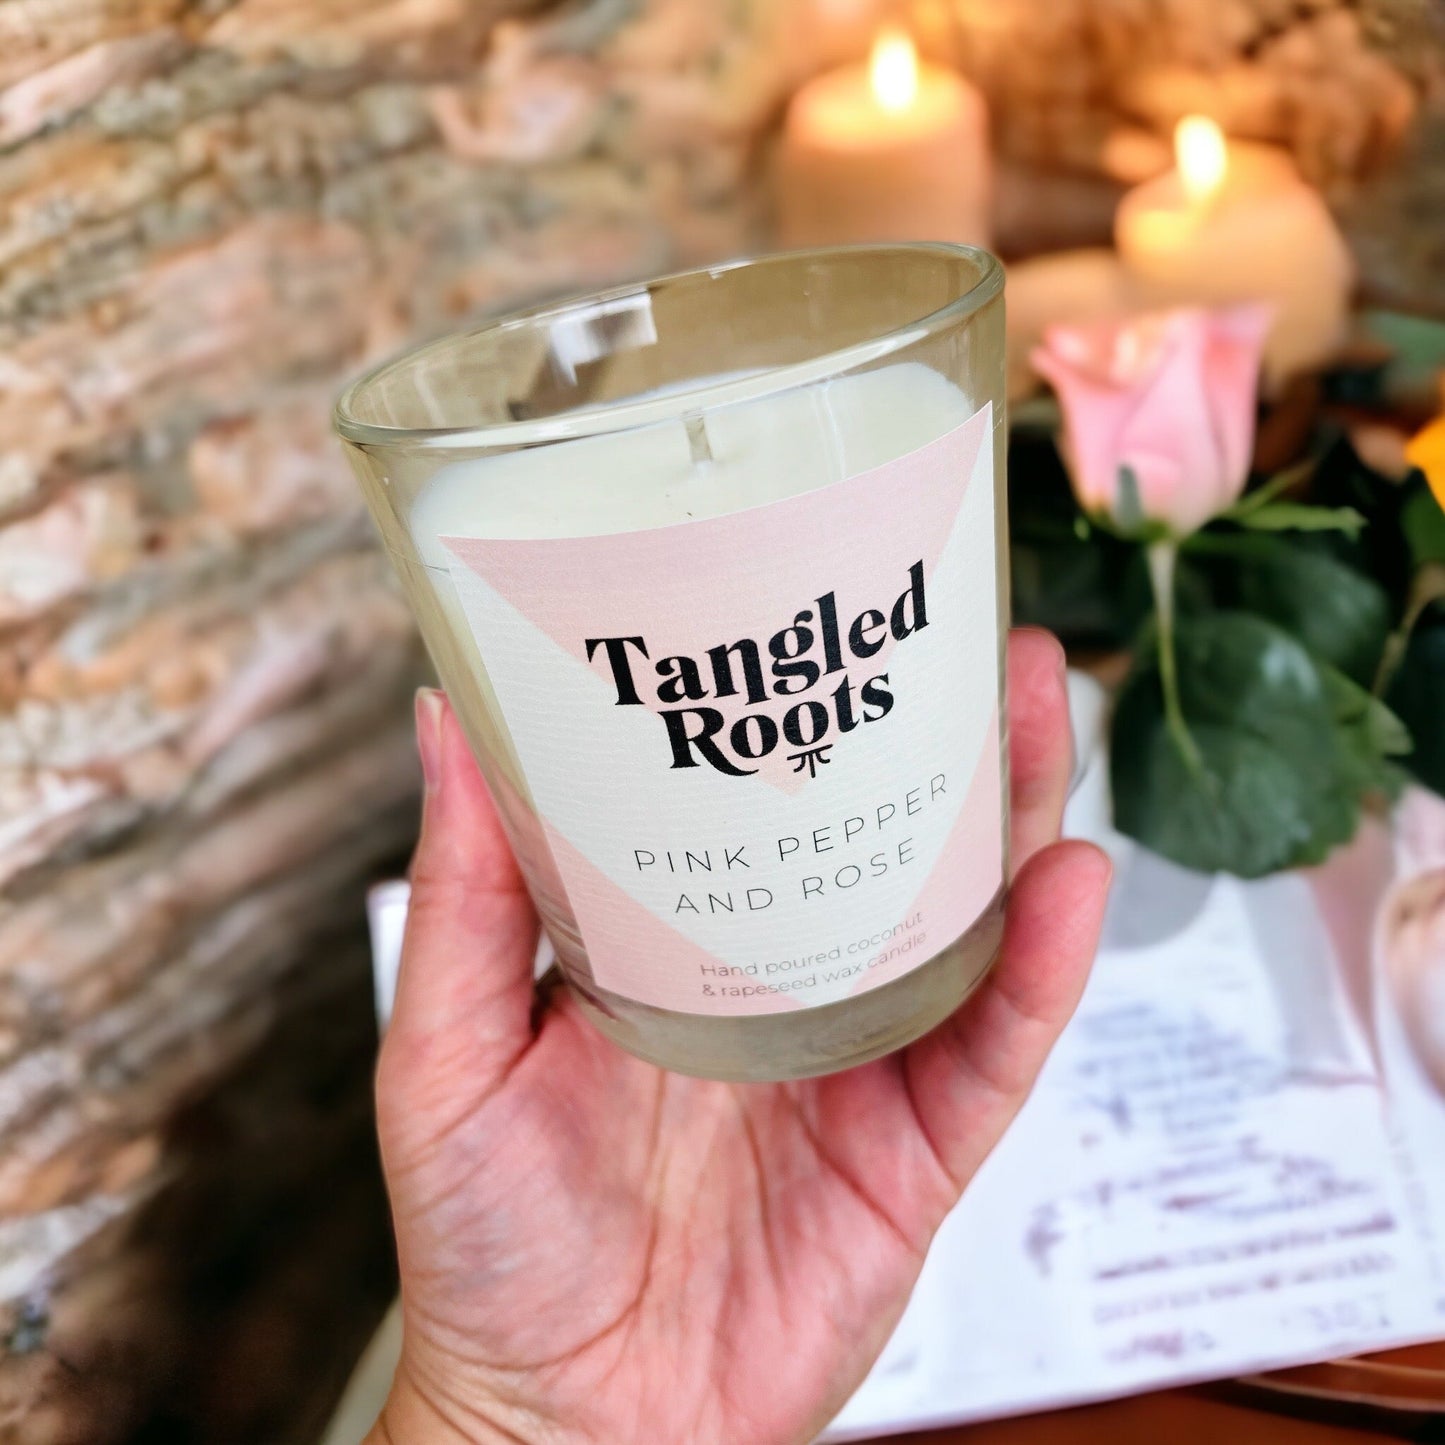 Pink Pepper and Rose Candle - Tangledroots.shop